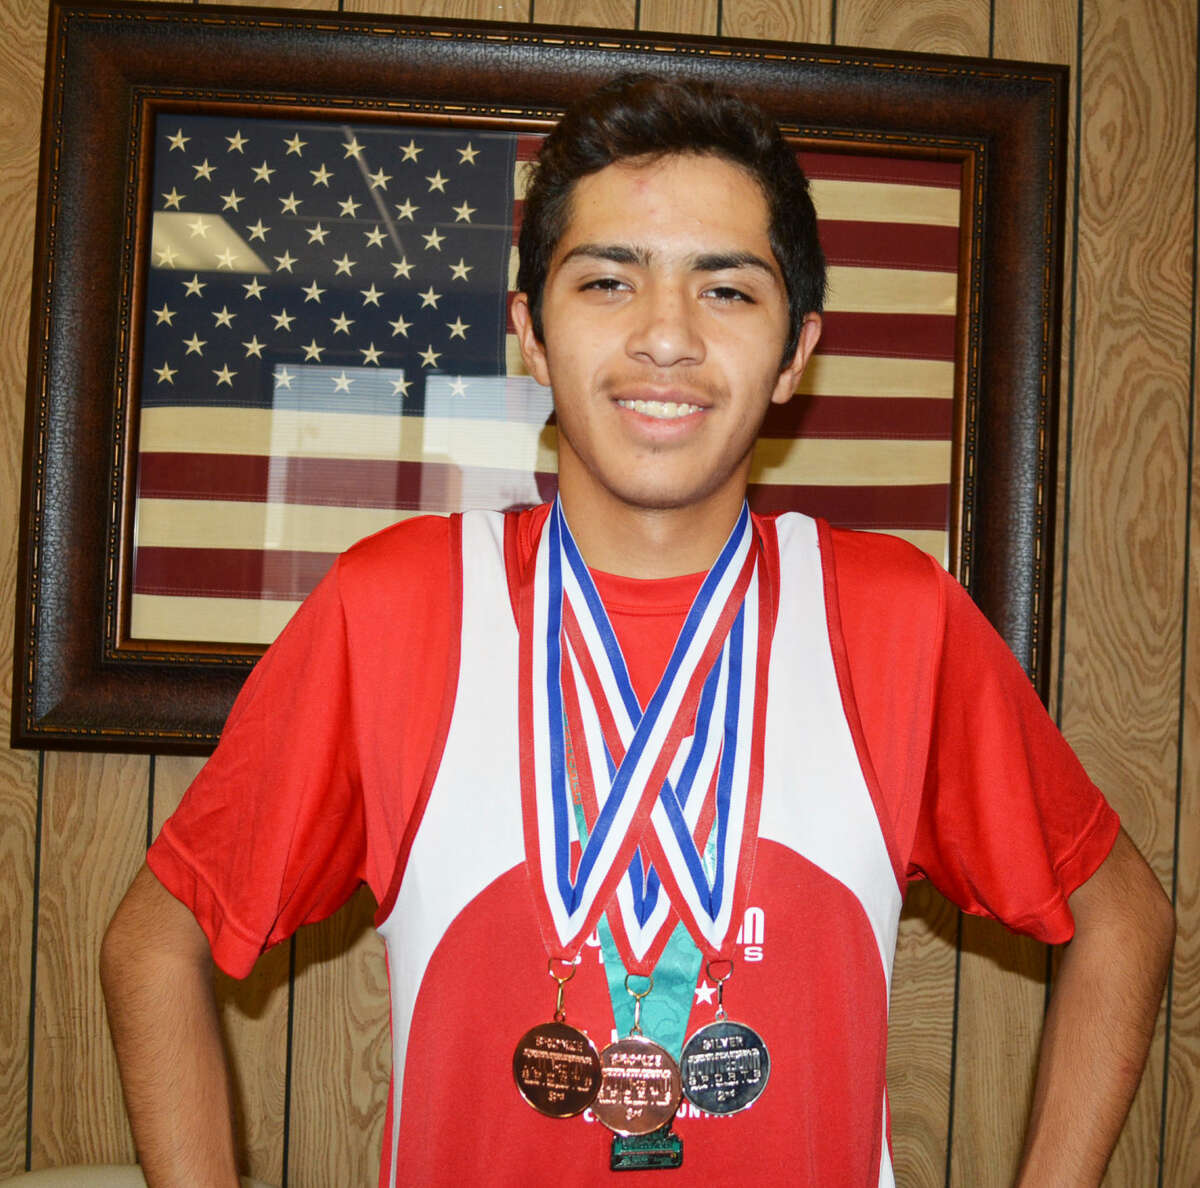 Plainview's Sergio Lara displays the medals he earned in two cross-country races in Australia last week. The Plainview High junior ran as part of the Down Under Sports program, which gives select high school athletes the chance to compete in their sport and learn about the Australian culture.